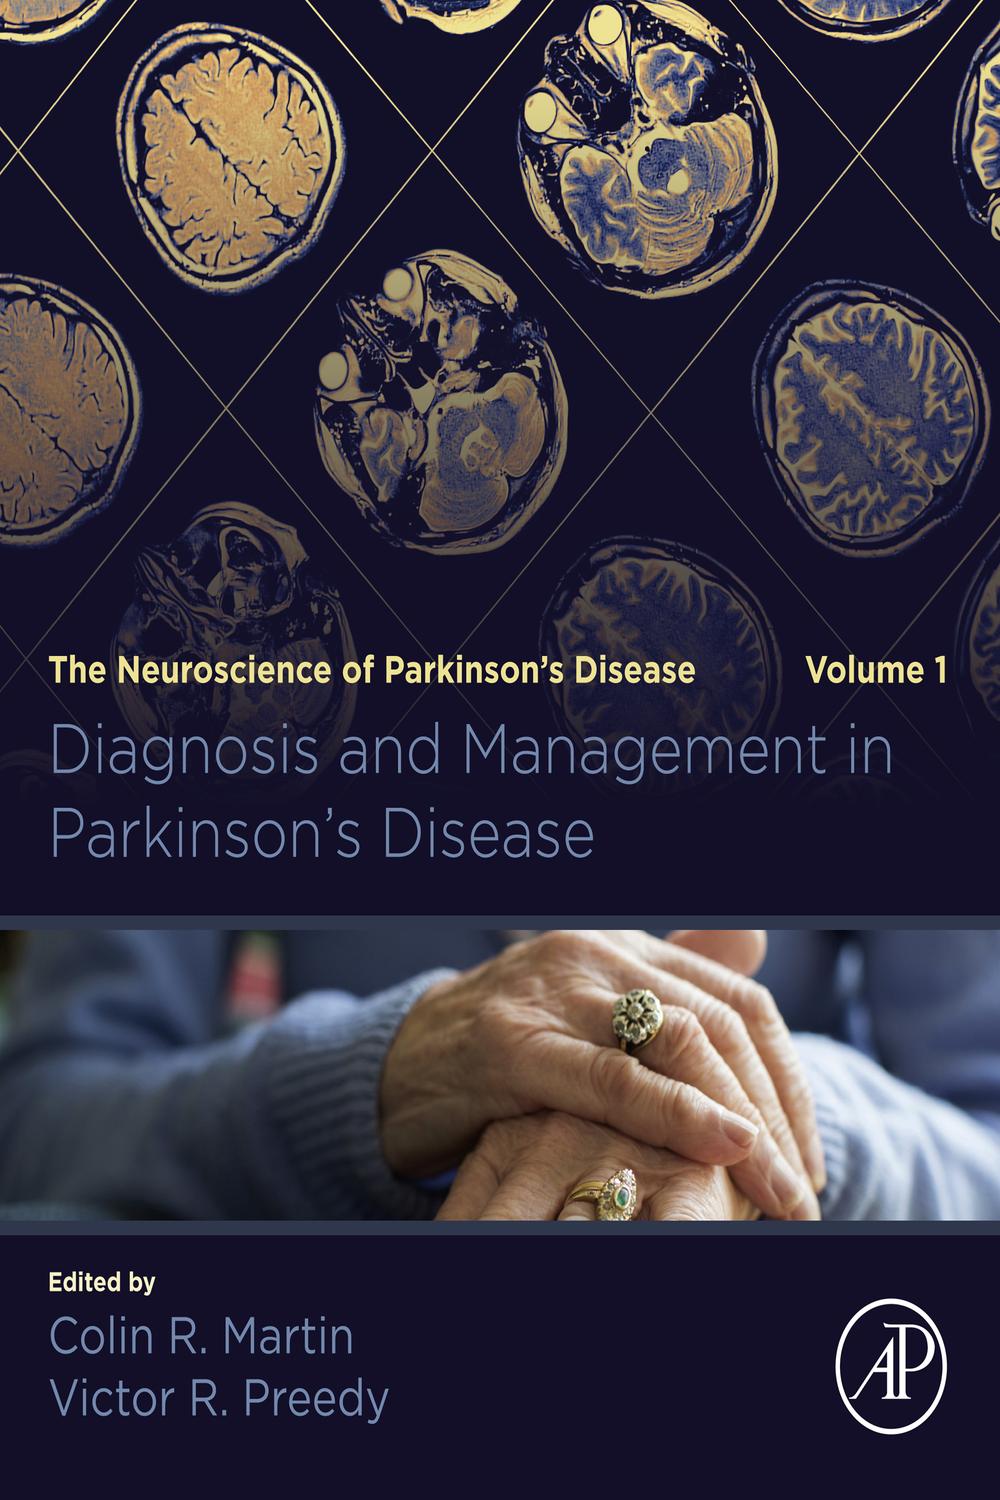 Diagnosis and Management in Parkinson's Disease - Colin R. Martin, Victor R. Preedy